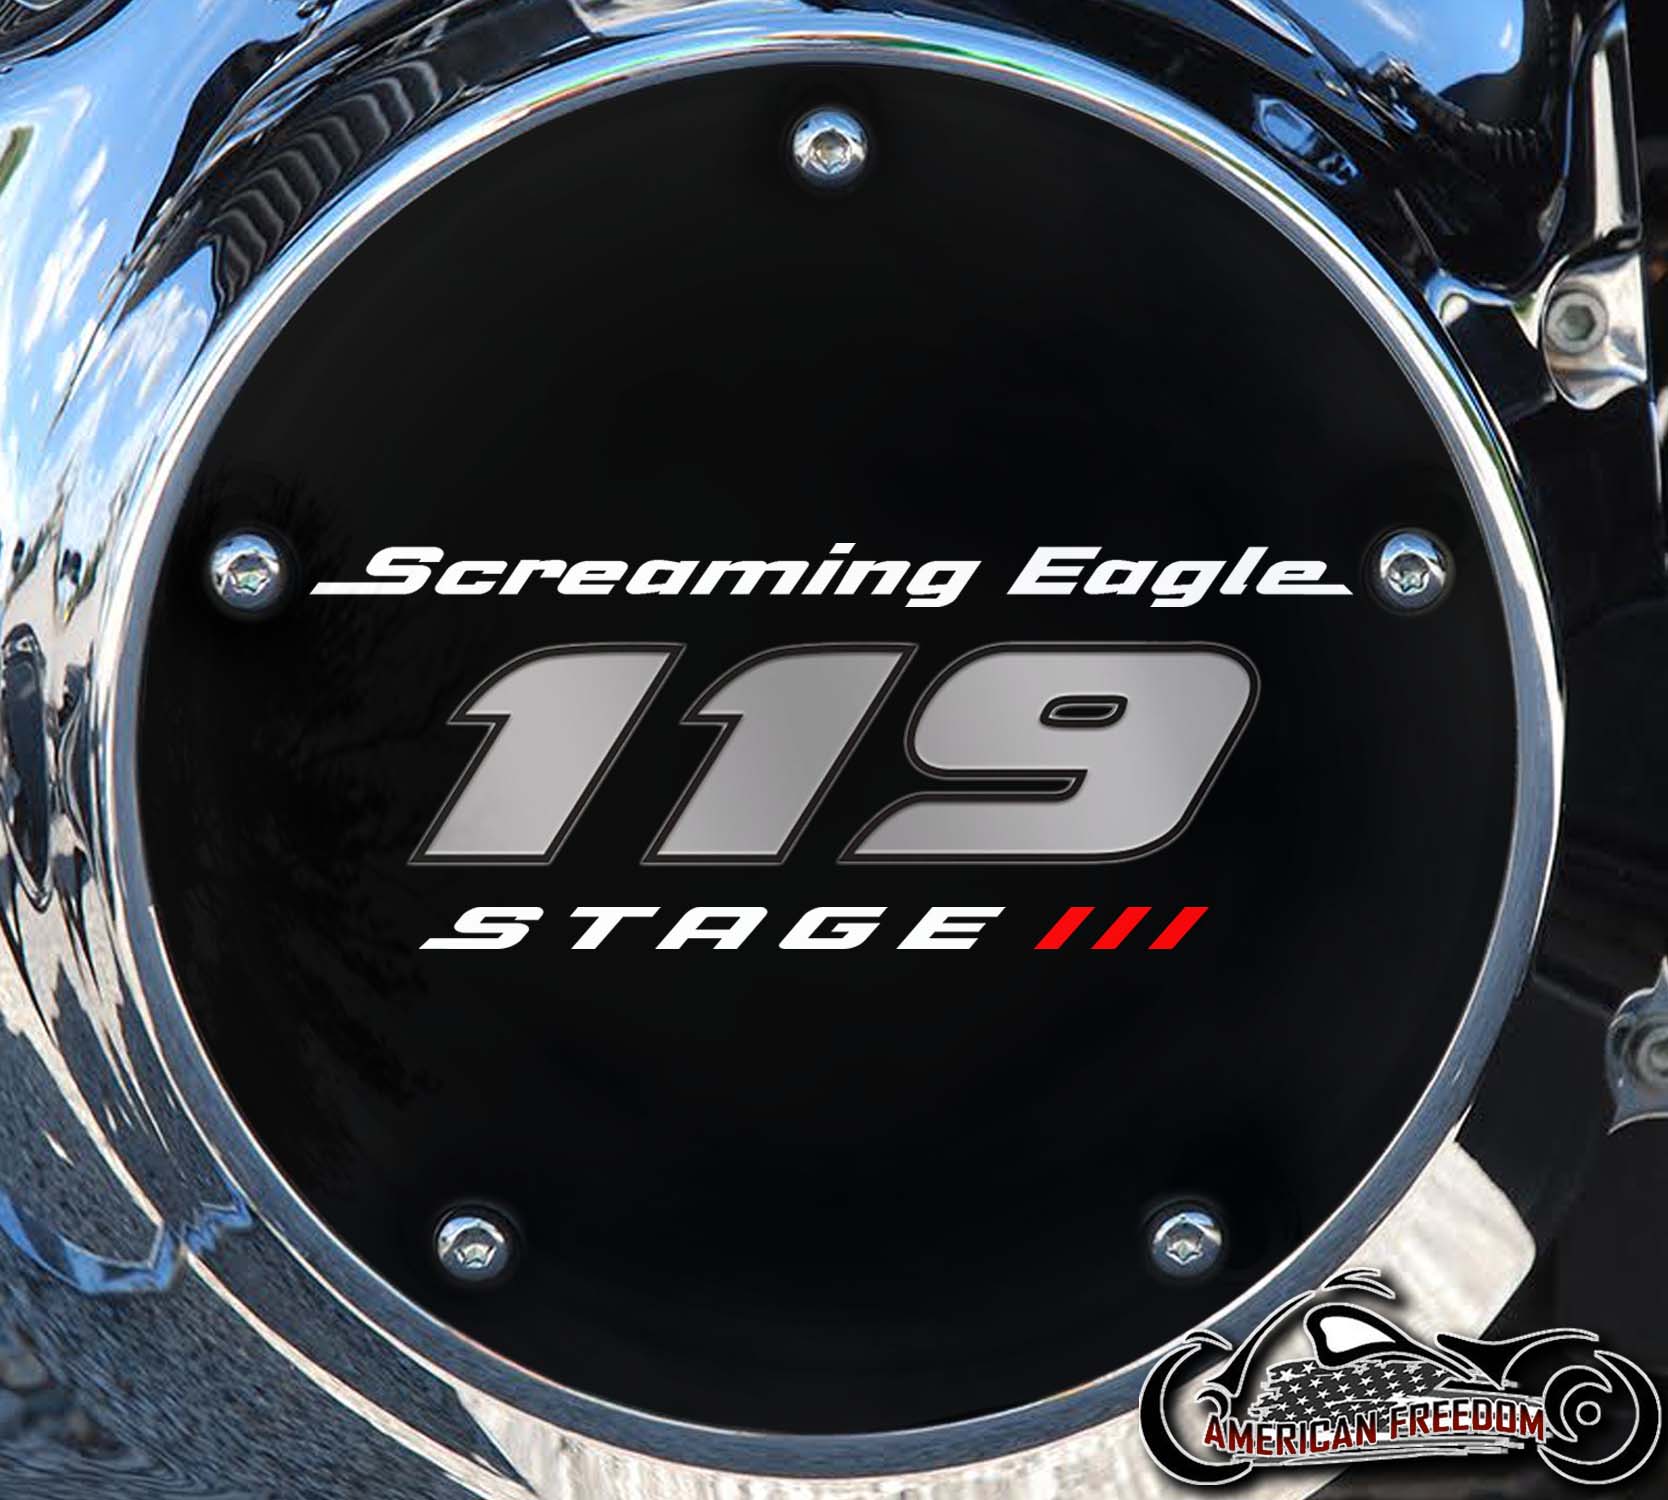 Screaming Eagle Stage III 119 Derby Cover